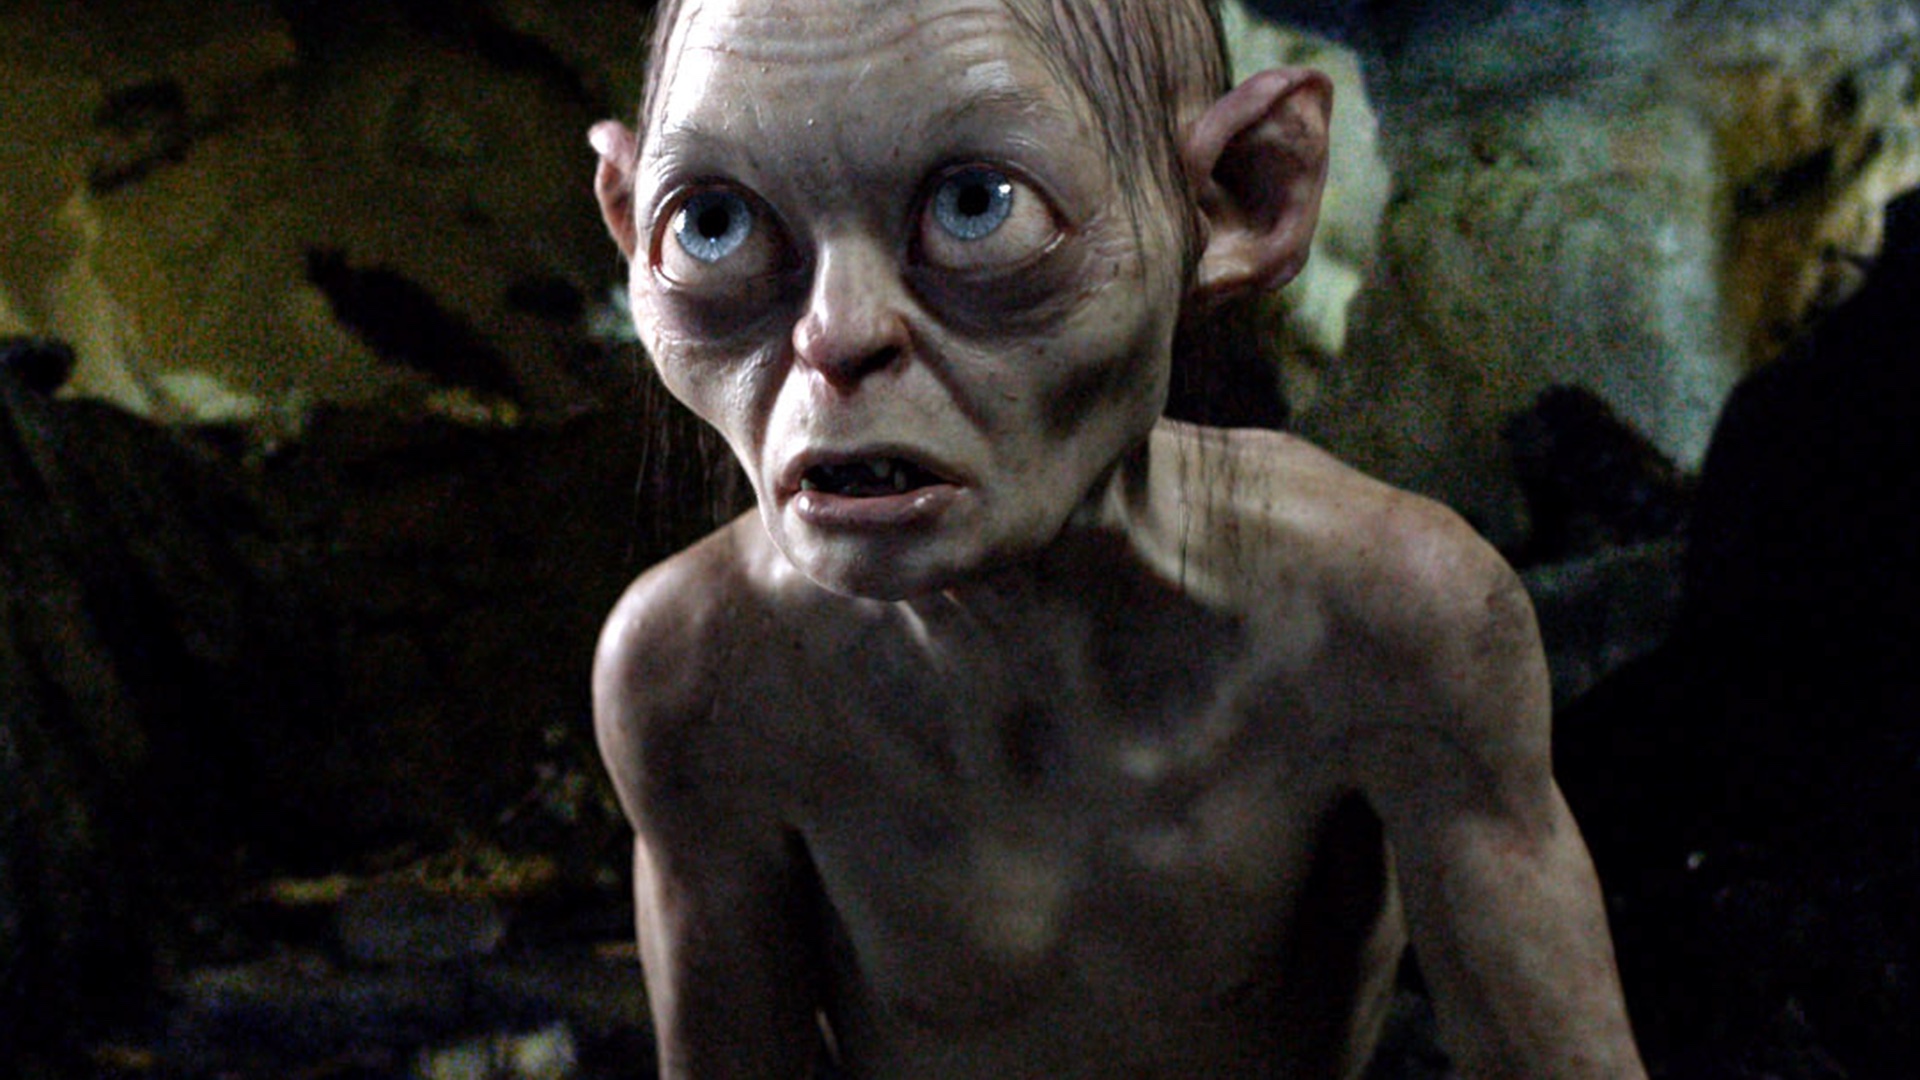 The Lord of the Rings: Gollum is a next-gen stealth action prequel